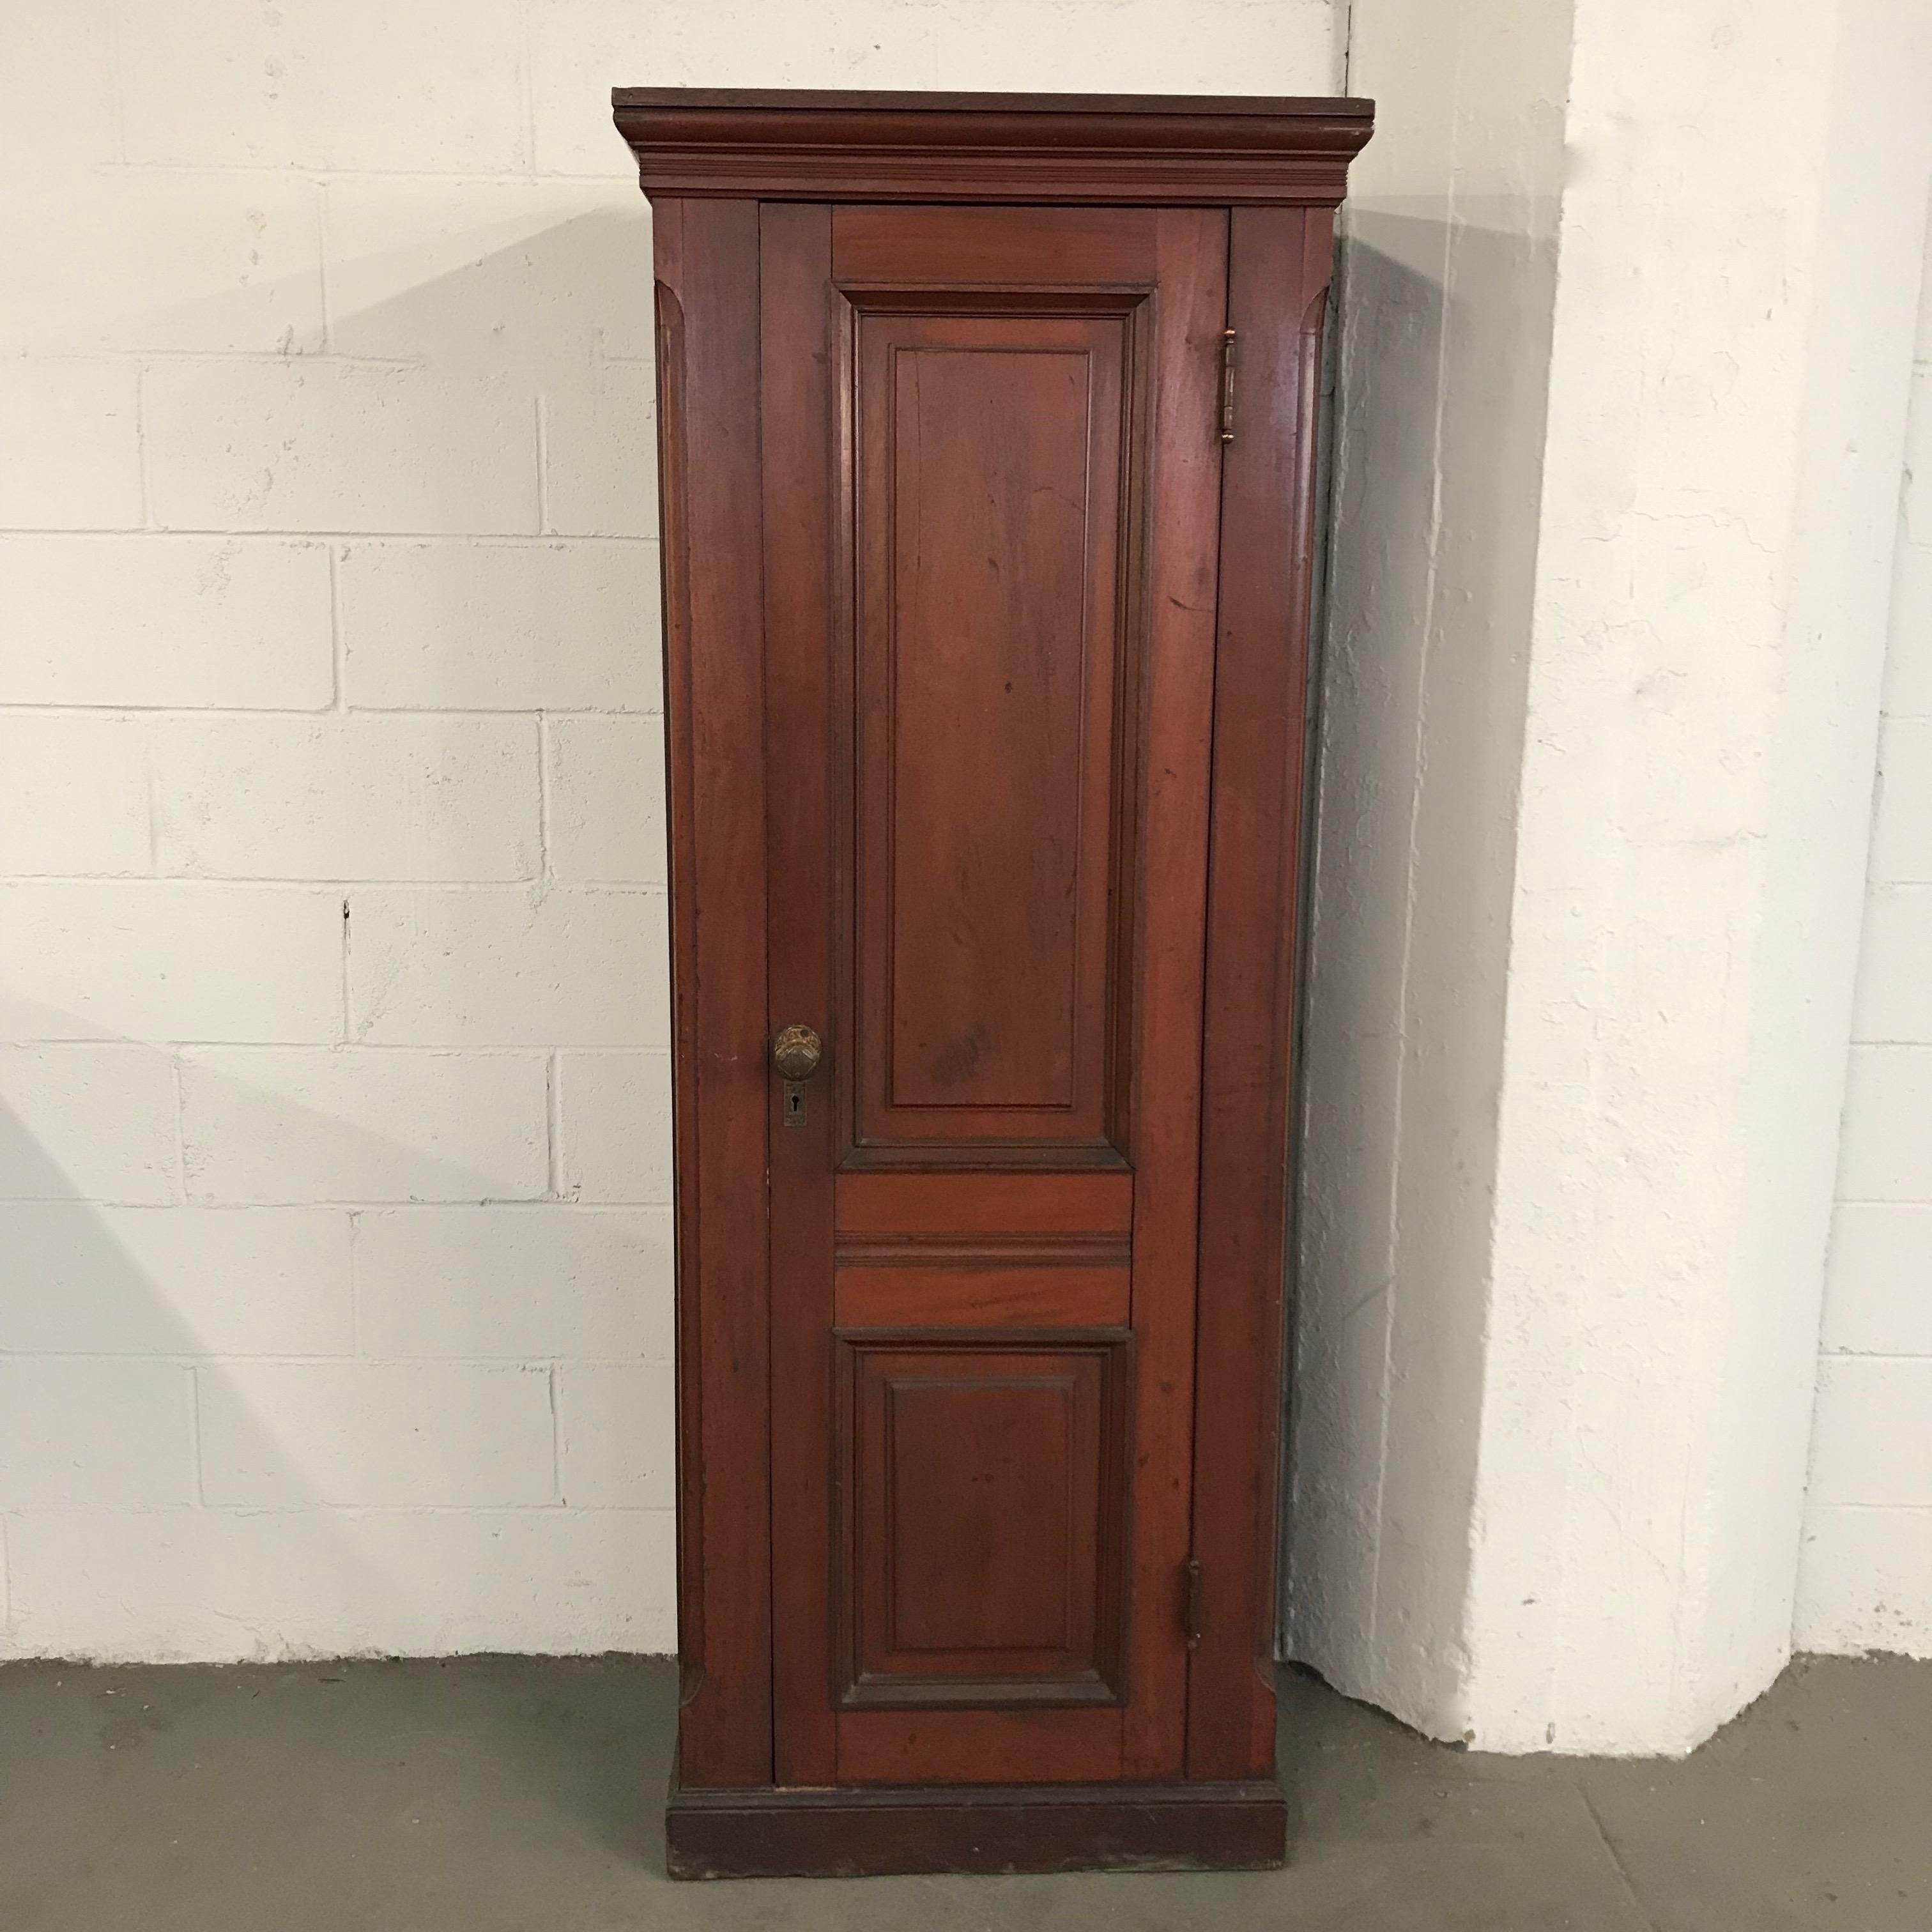 Eastlake, carved mahogany armoire cabinet with decorative, brass door knob has interior shelves for storage and can accept a rod on top for hanging clothes. The interior measures 23 inches wide and 13.5 inches deep.